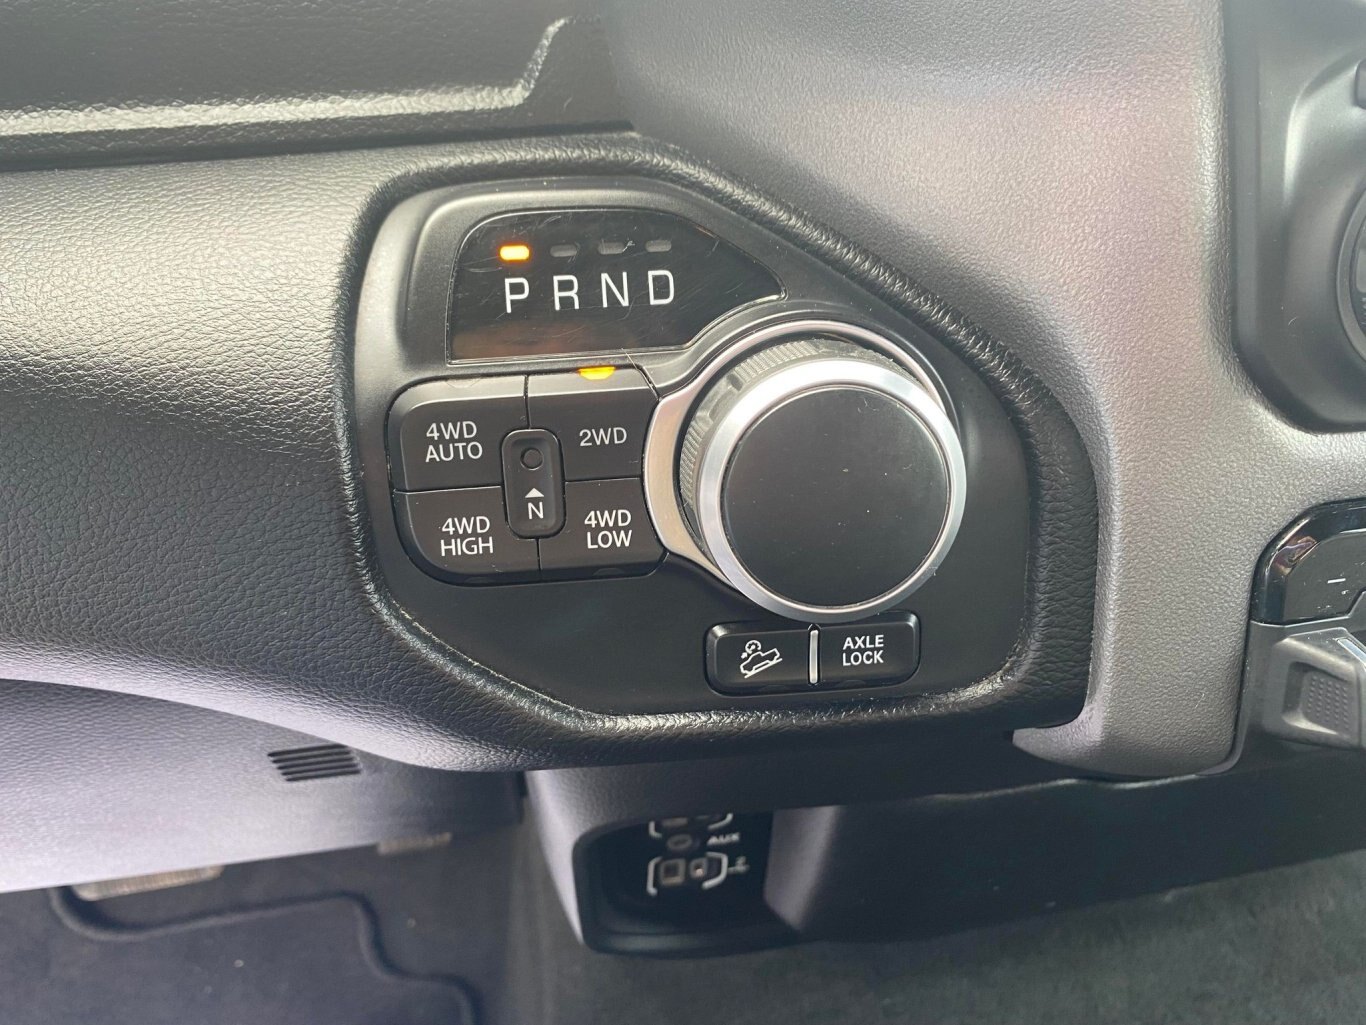 2021 DODGE RAM 1500 BIG HORN 4X4 CREW CAB WITH HEATED SEATS, HEATED STEERING WHEEL AND REAR VIEW CAMERA!! ( PREVIOUS RENTAL )